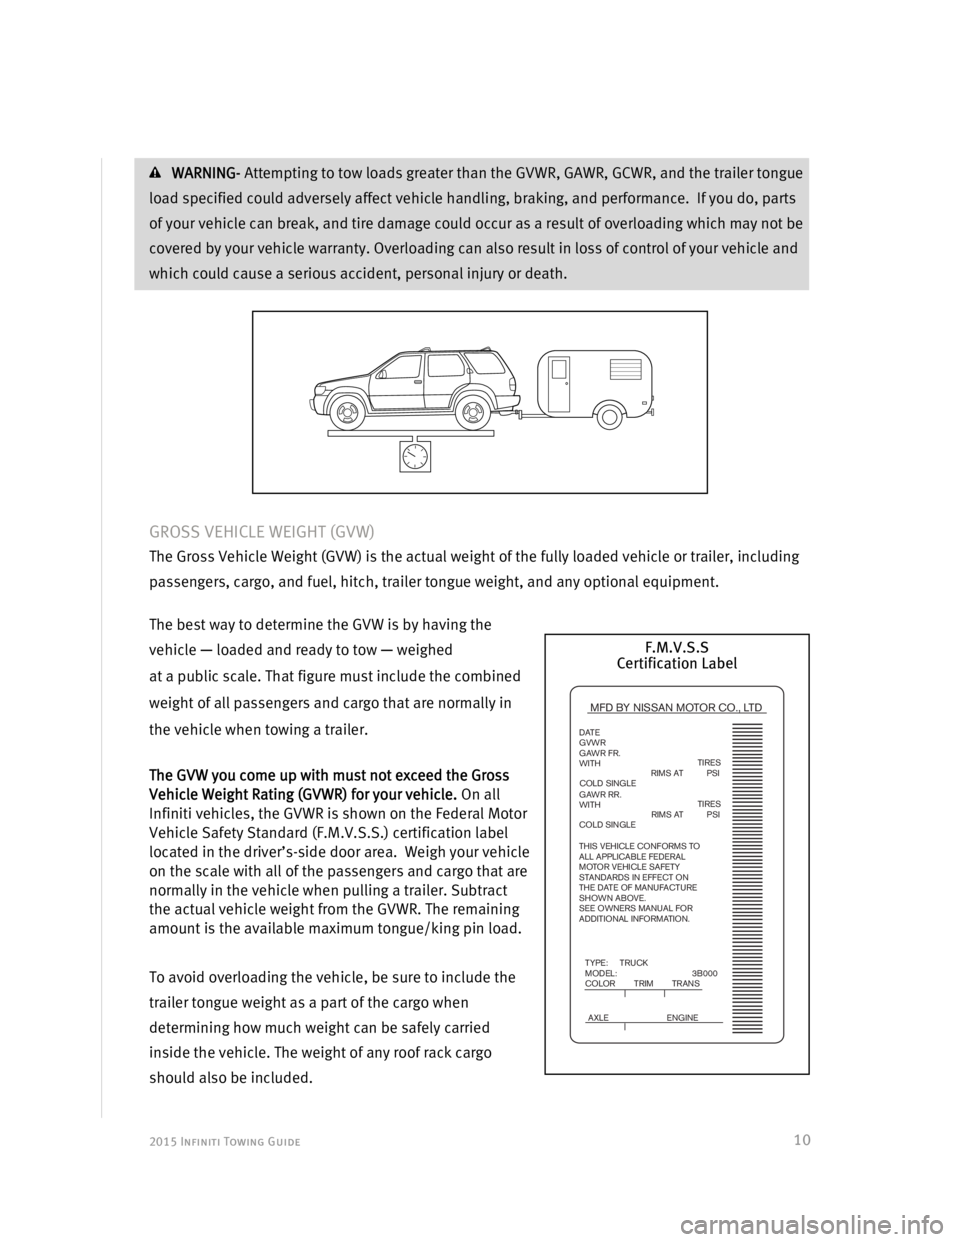 INFINITI QX50 2015  Towing Guide  2015 Infiniti Towing Guide  
 
 
10
 WARNING- Attempting to tow loads greater than the GVWR, GAWR, GCWR, and the trailer tongue 
load specified could adversely affect vehicle handling, braking, and p